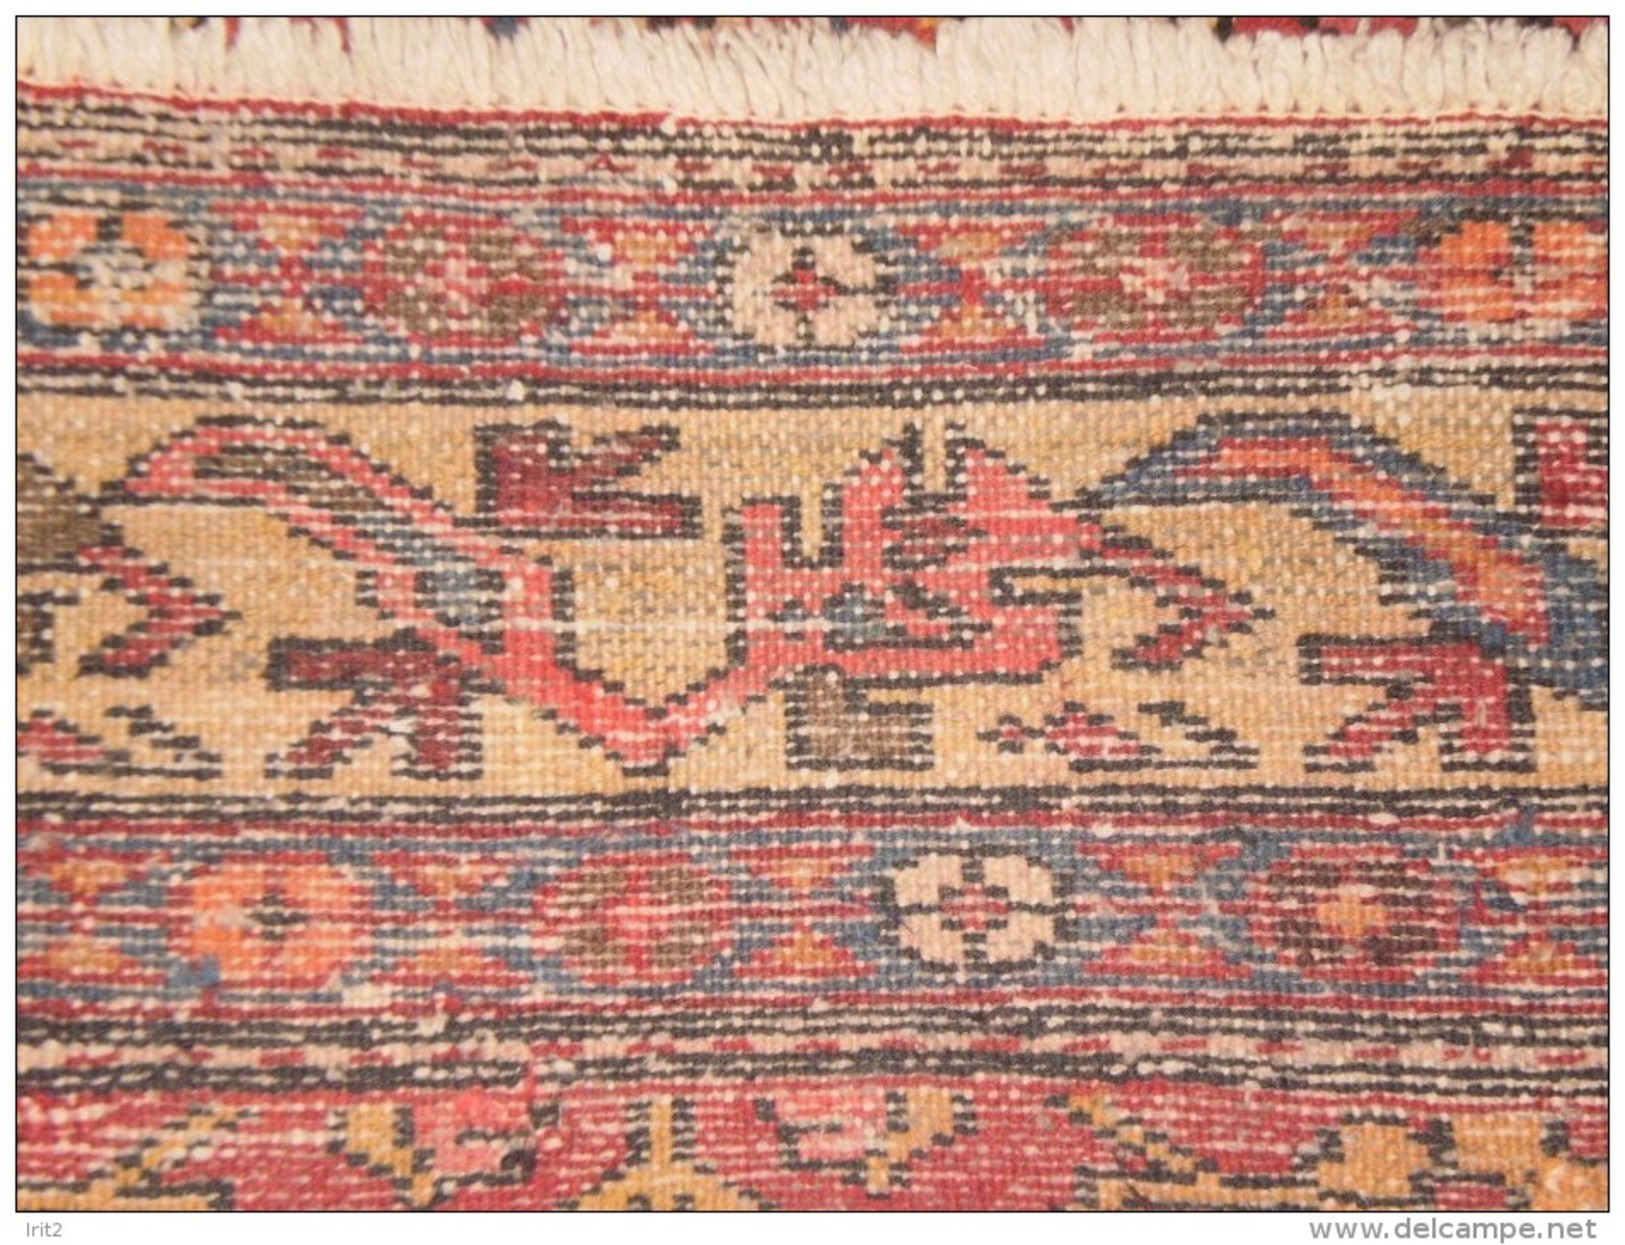 PERSIAN CARPET ORIGINAL PERSIA FULL QUALITY HAND KNOTTED 'WOOL COLOR TO PLANT OLD PROCESS PERIOD YEAR 1930 - Teppiche & Wandteppiche